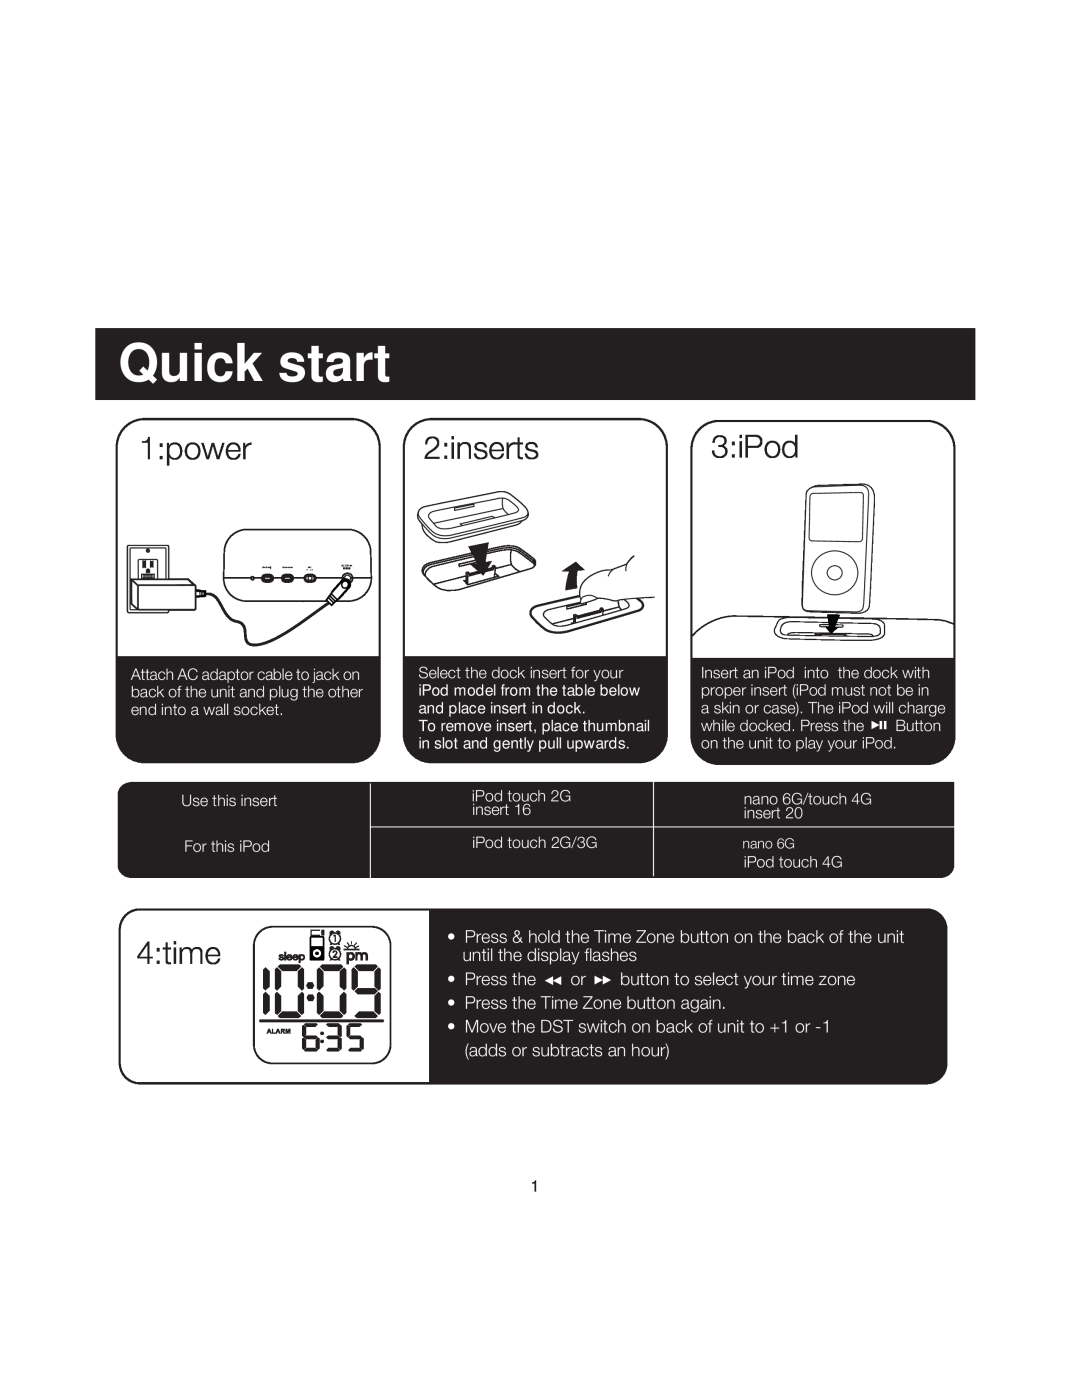 iHome ihome manual Quick start, power, inserts, iPod, Press the or button to select your time zone 